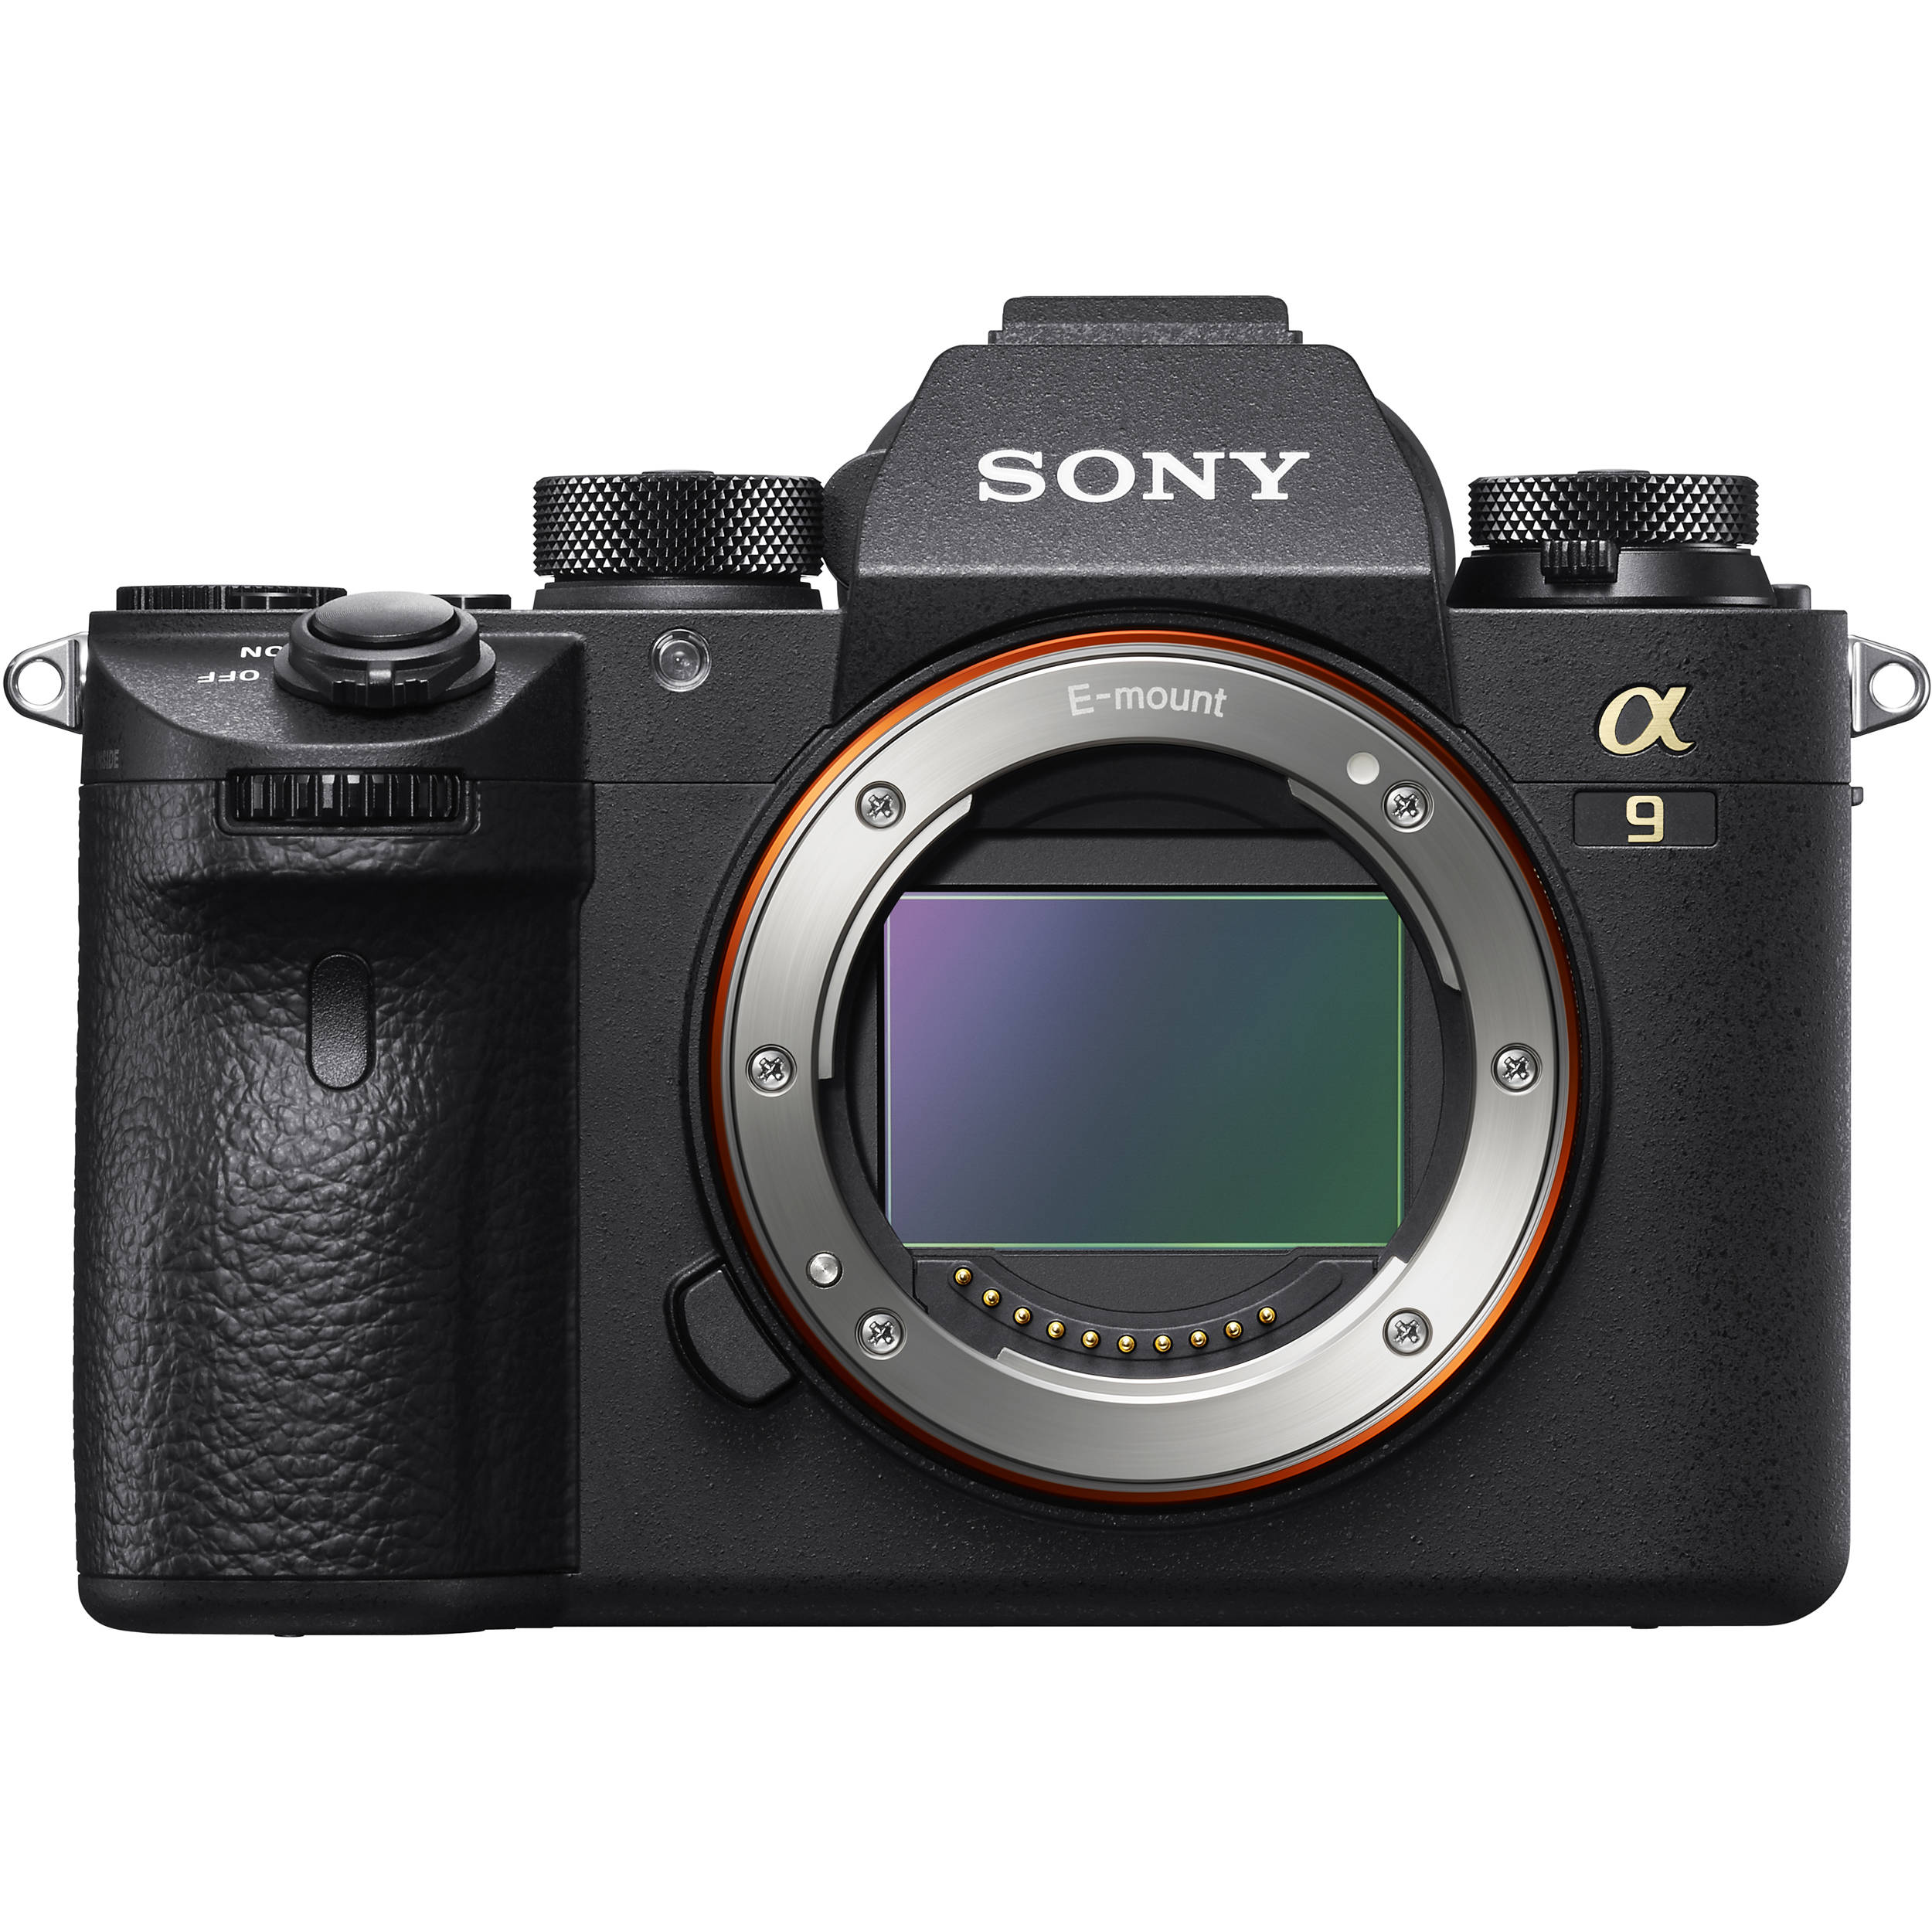 Sony α9 Features Full-Frame Stacked CMOS Sensor